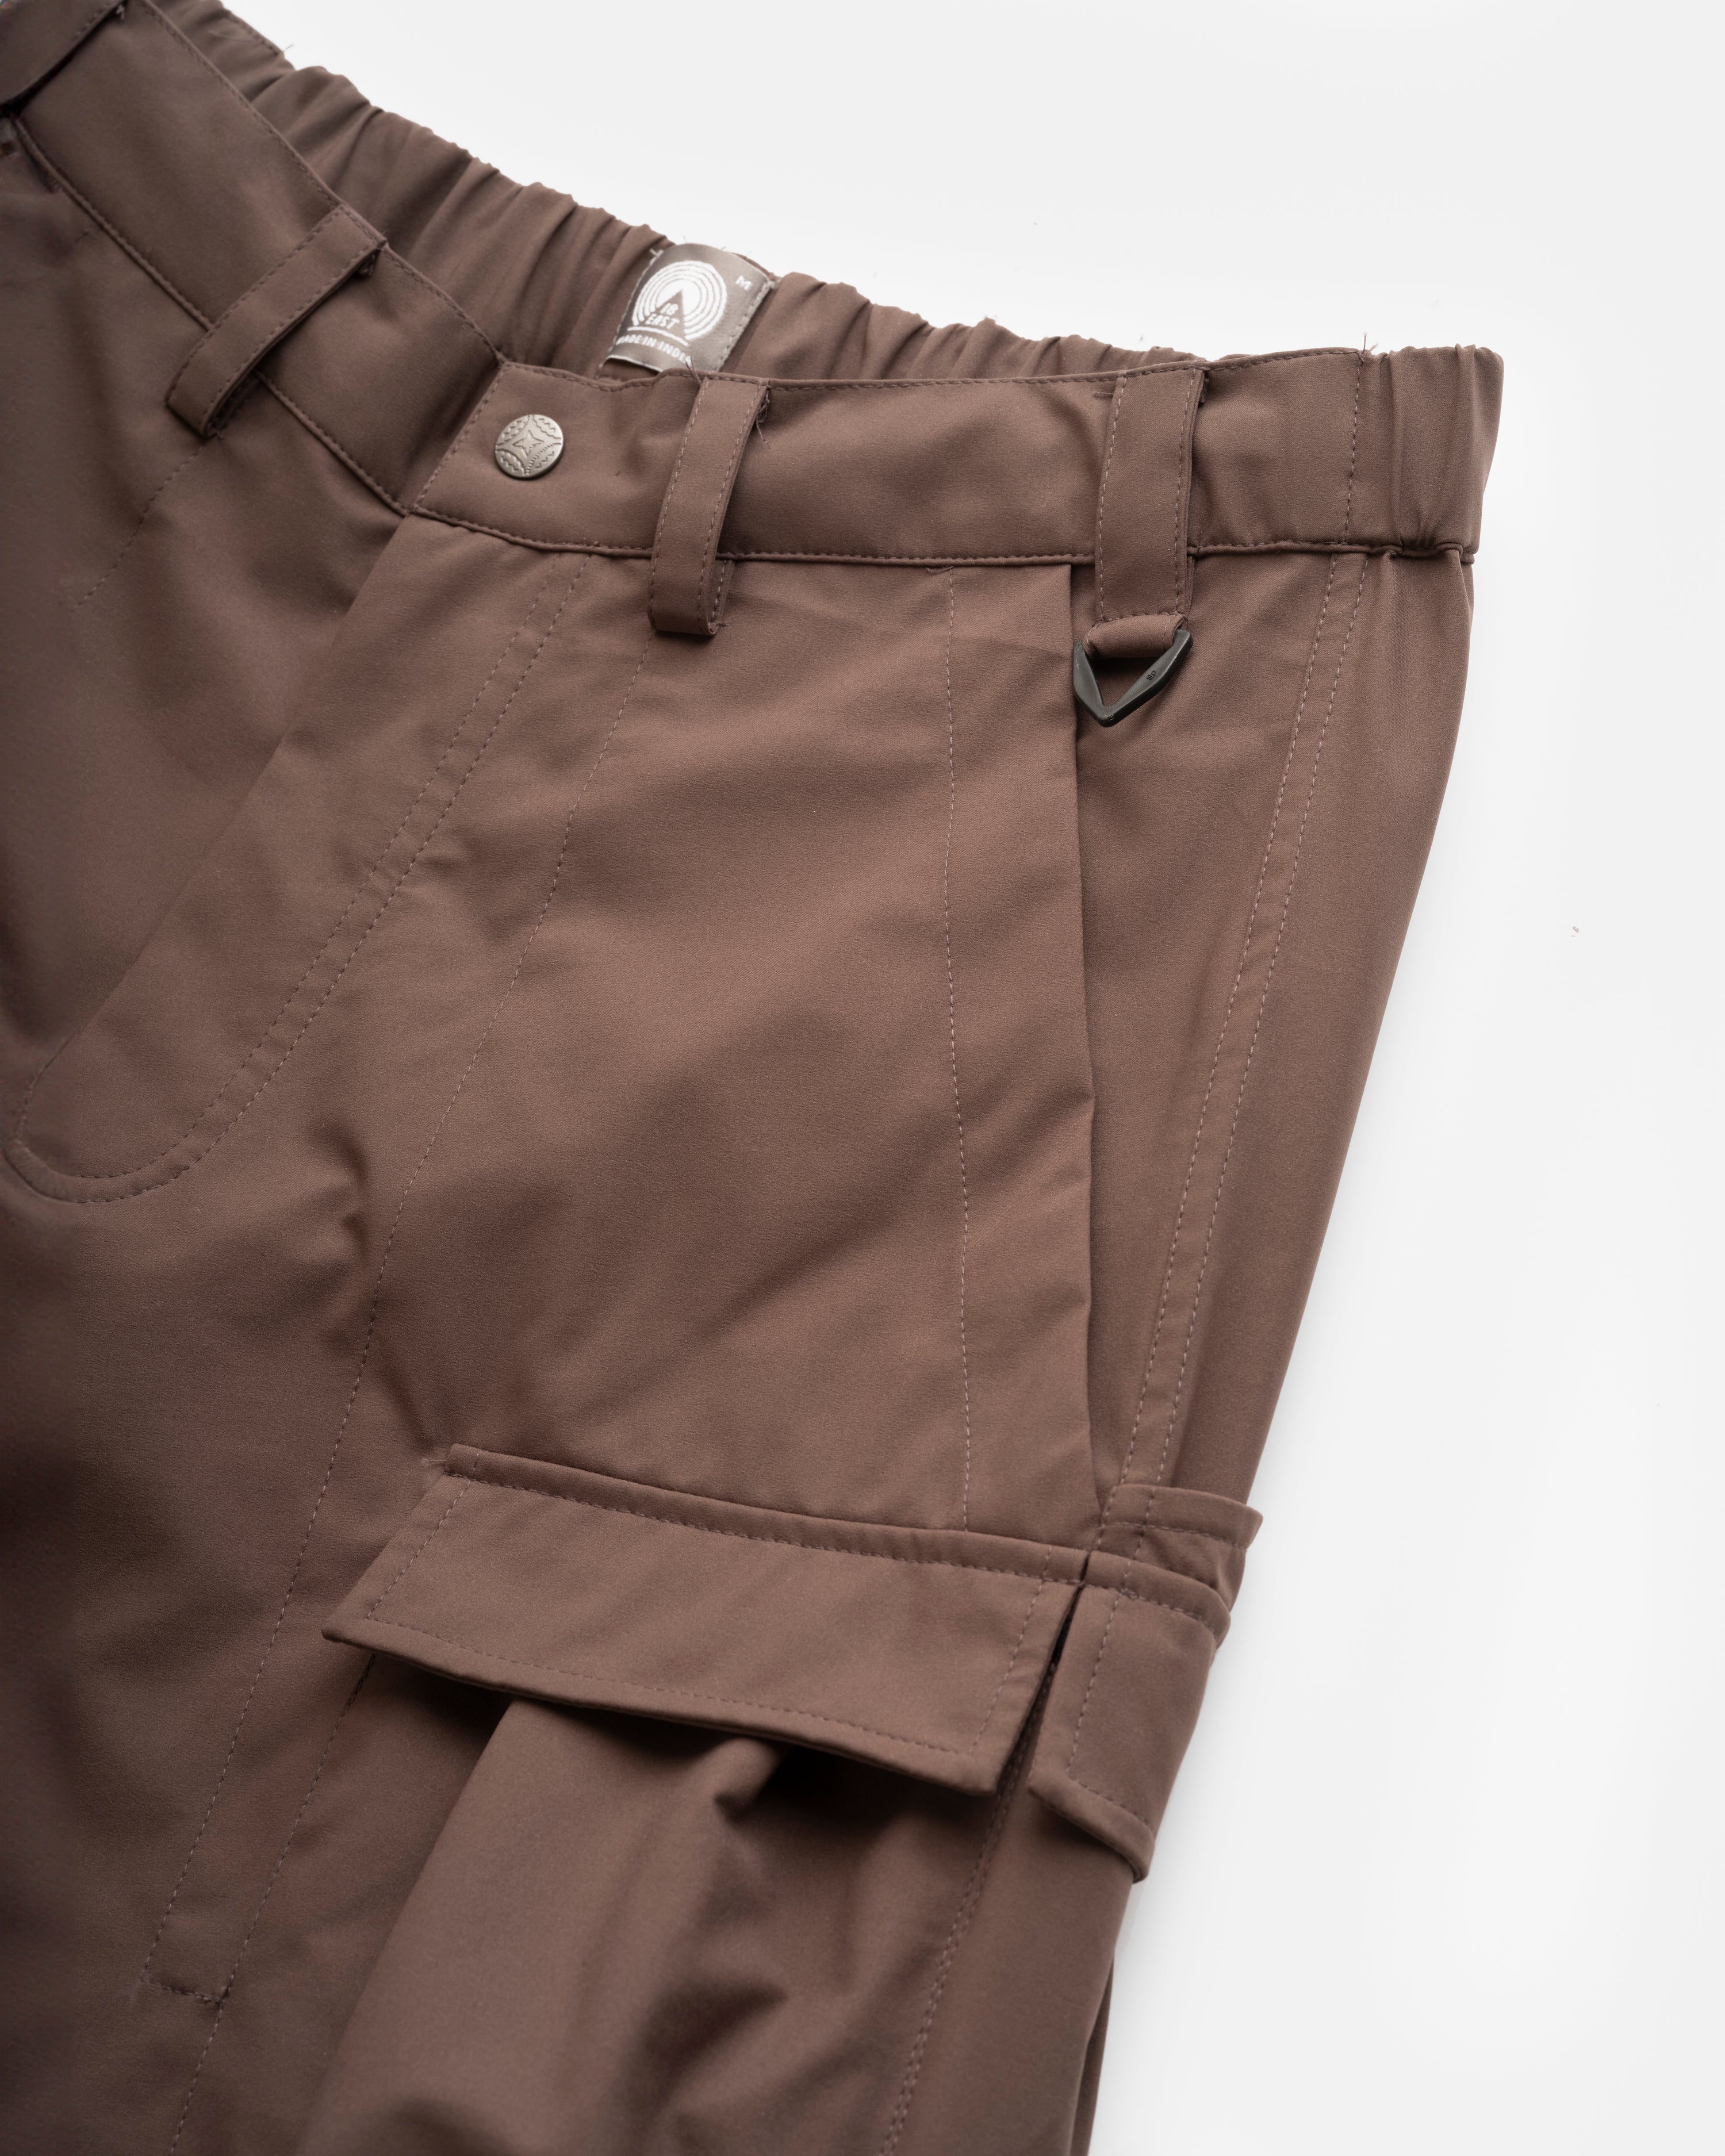 CASCADE OUTDOOR PROTECTION SYSTEM CONVERTIBLE CARGO PANT - BROWN / WASHED BLACK WATER-REPELLENT BONDED MEMBRANE